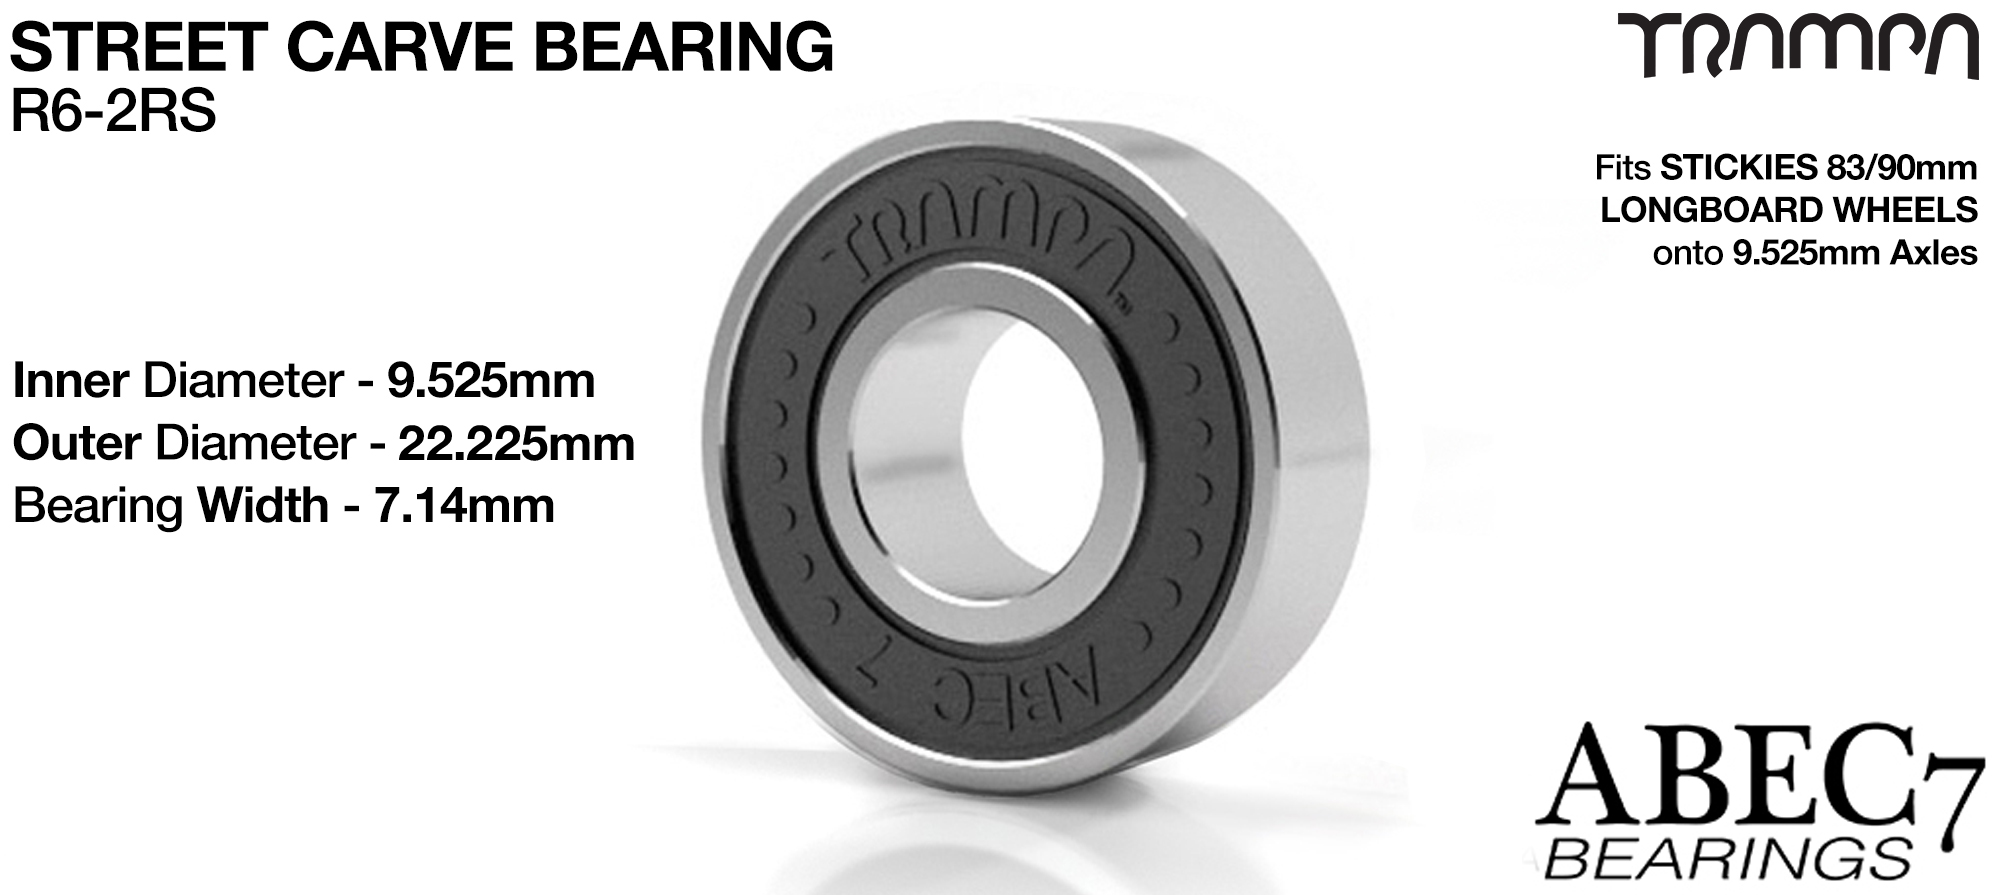 R6 2RS Abec 7 TRAMPA STREET CARVE Bearing used to fit STICKIES Longboard Wheels to 9.525mm Axels (9.525 x 22.225 x 7.14mm) - BLACK